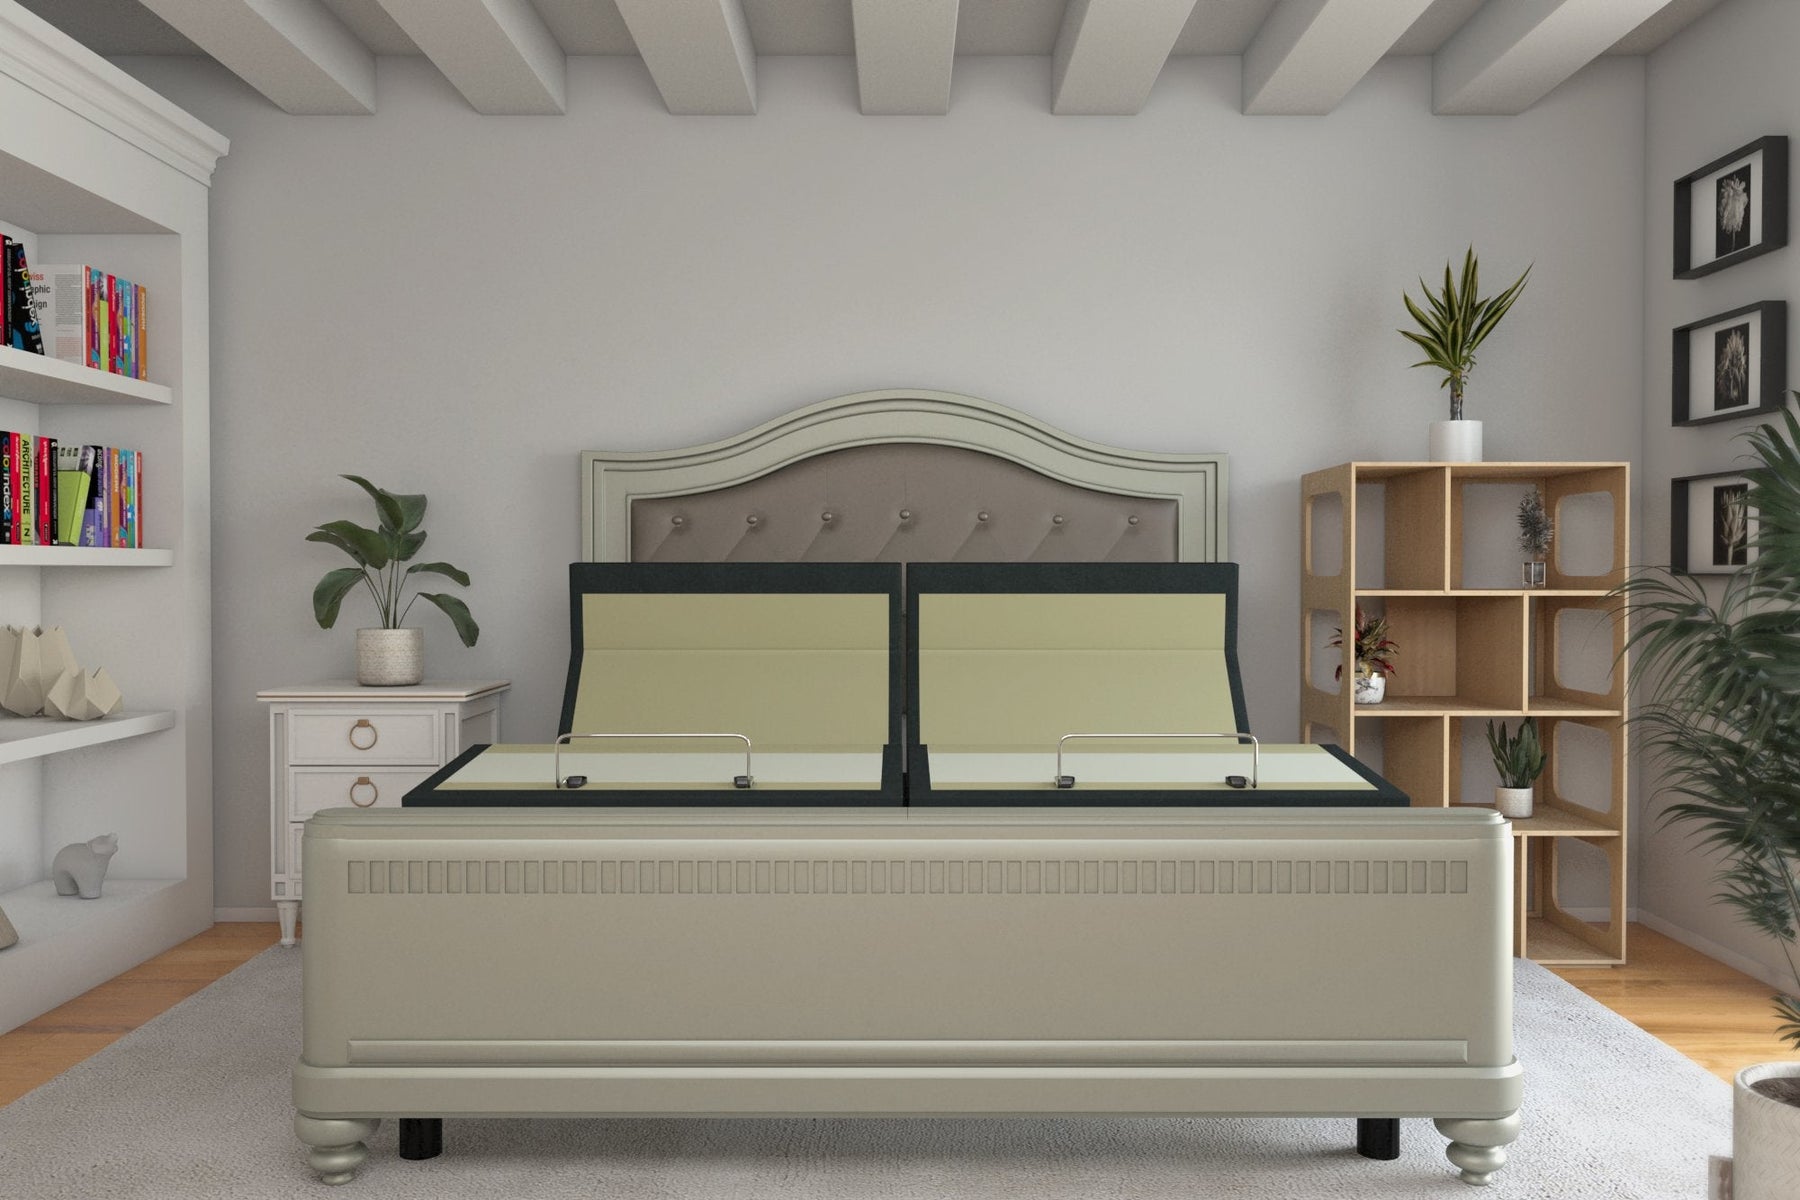 Do You Need a Special Mattress for an Adjustable Bed?: A Quick Guide